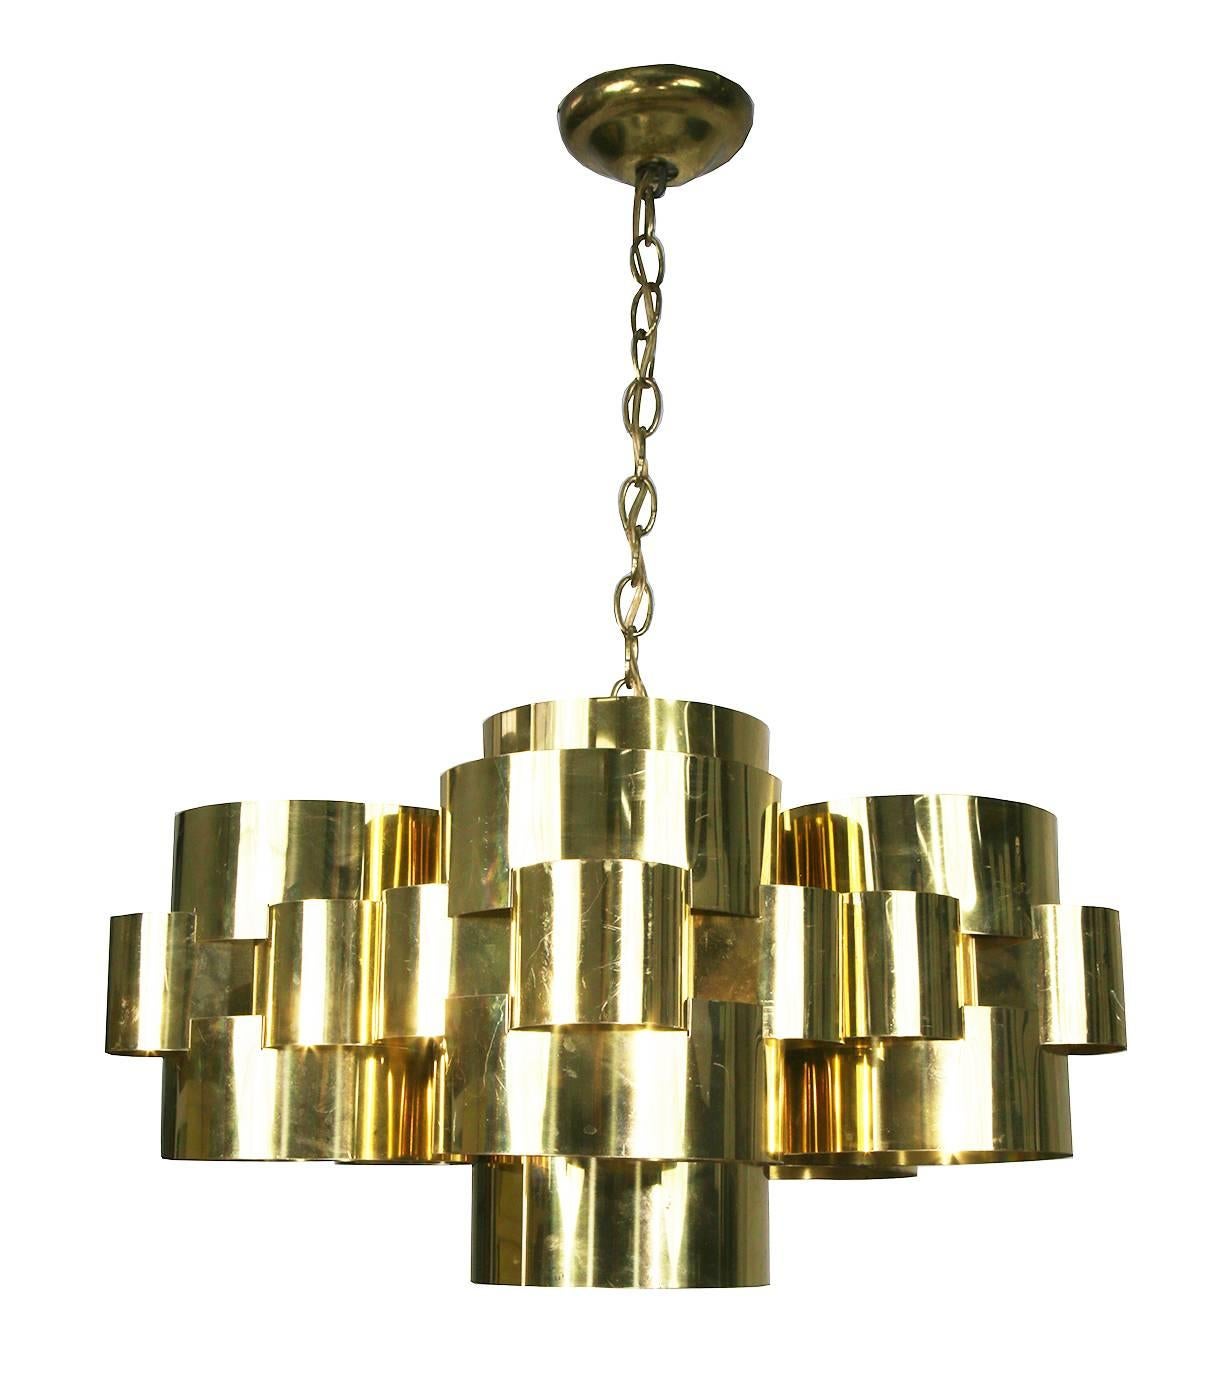 Signed Curtis Jere chandelier comprised of circular polished brass sheets grouped together to make a heavenly cloud formation.